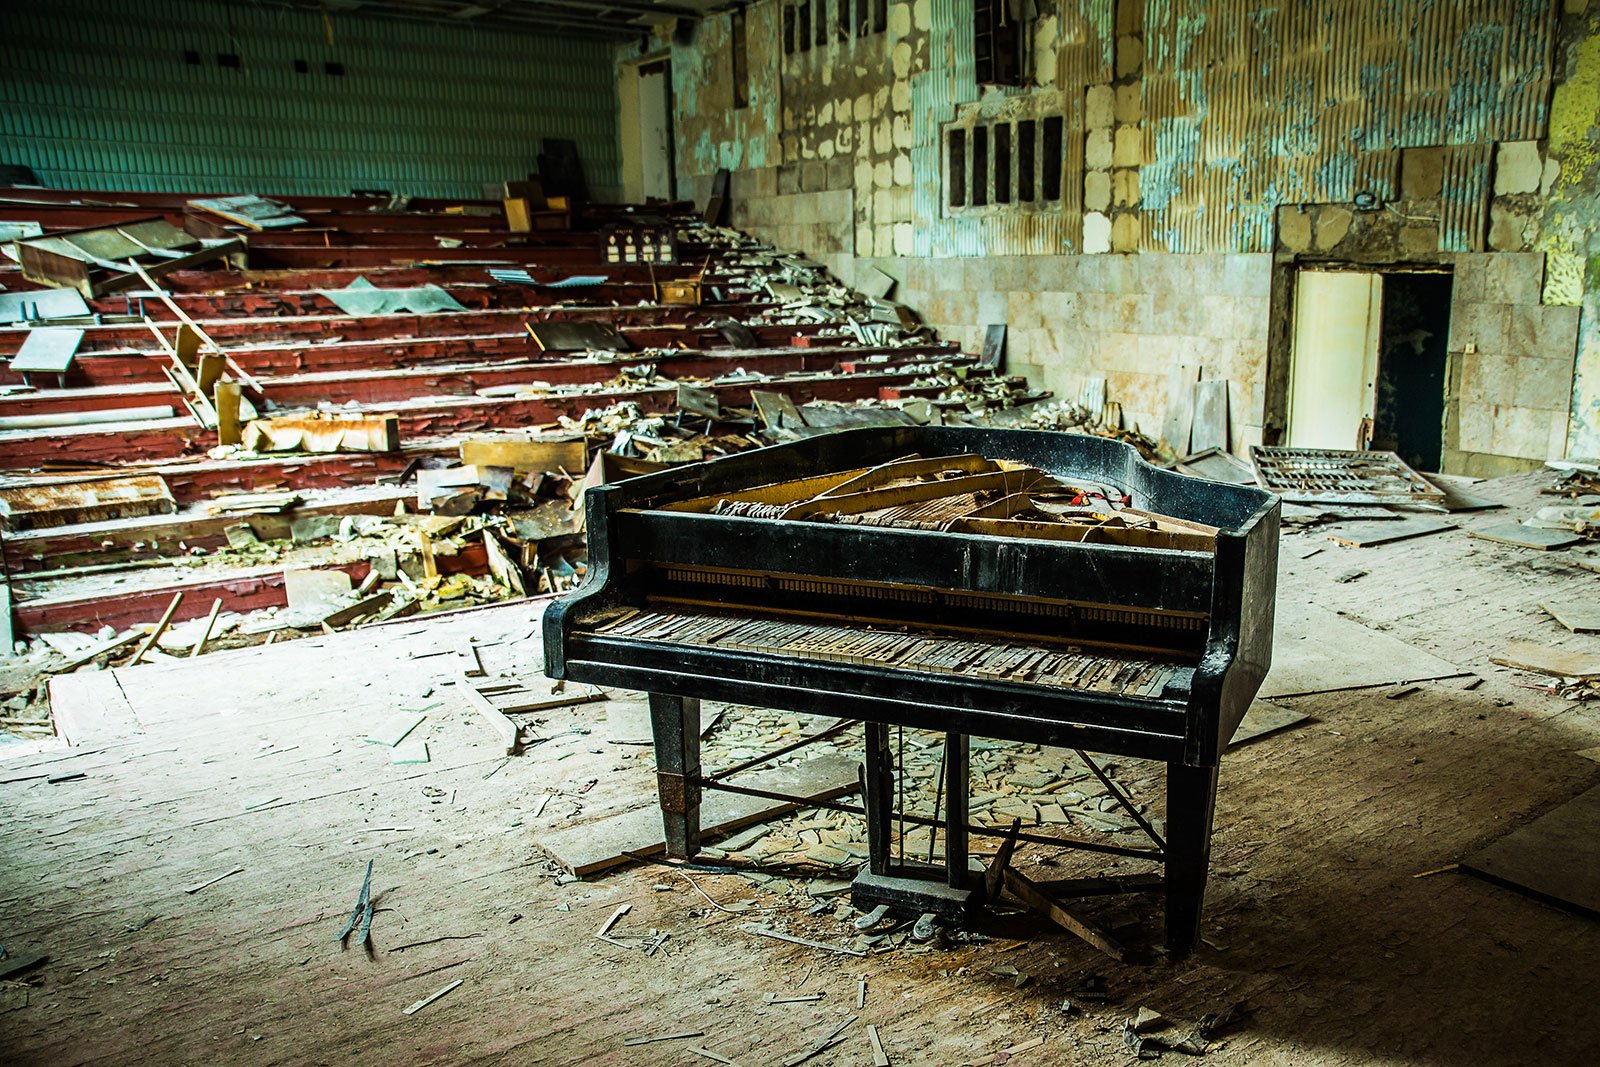 How to play the abandoned piano in Chernobyl